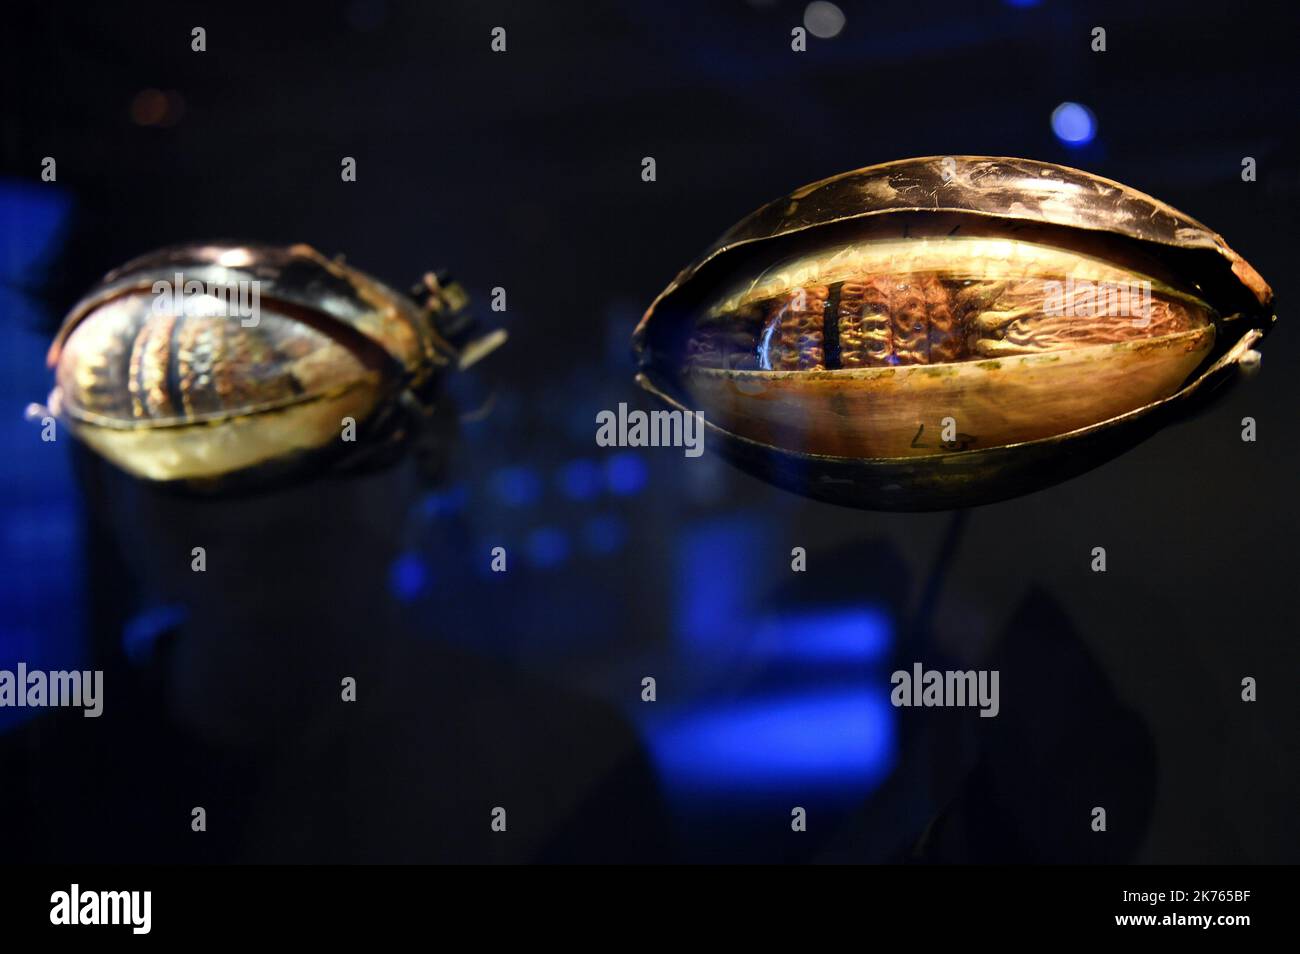 The eyes of Jabba the HUTT (episode VI The Return of the Jedi - 1983) in the exhibition Star Wars Identities. Stock Photo